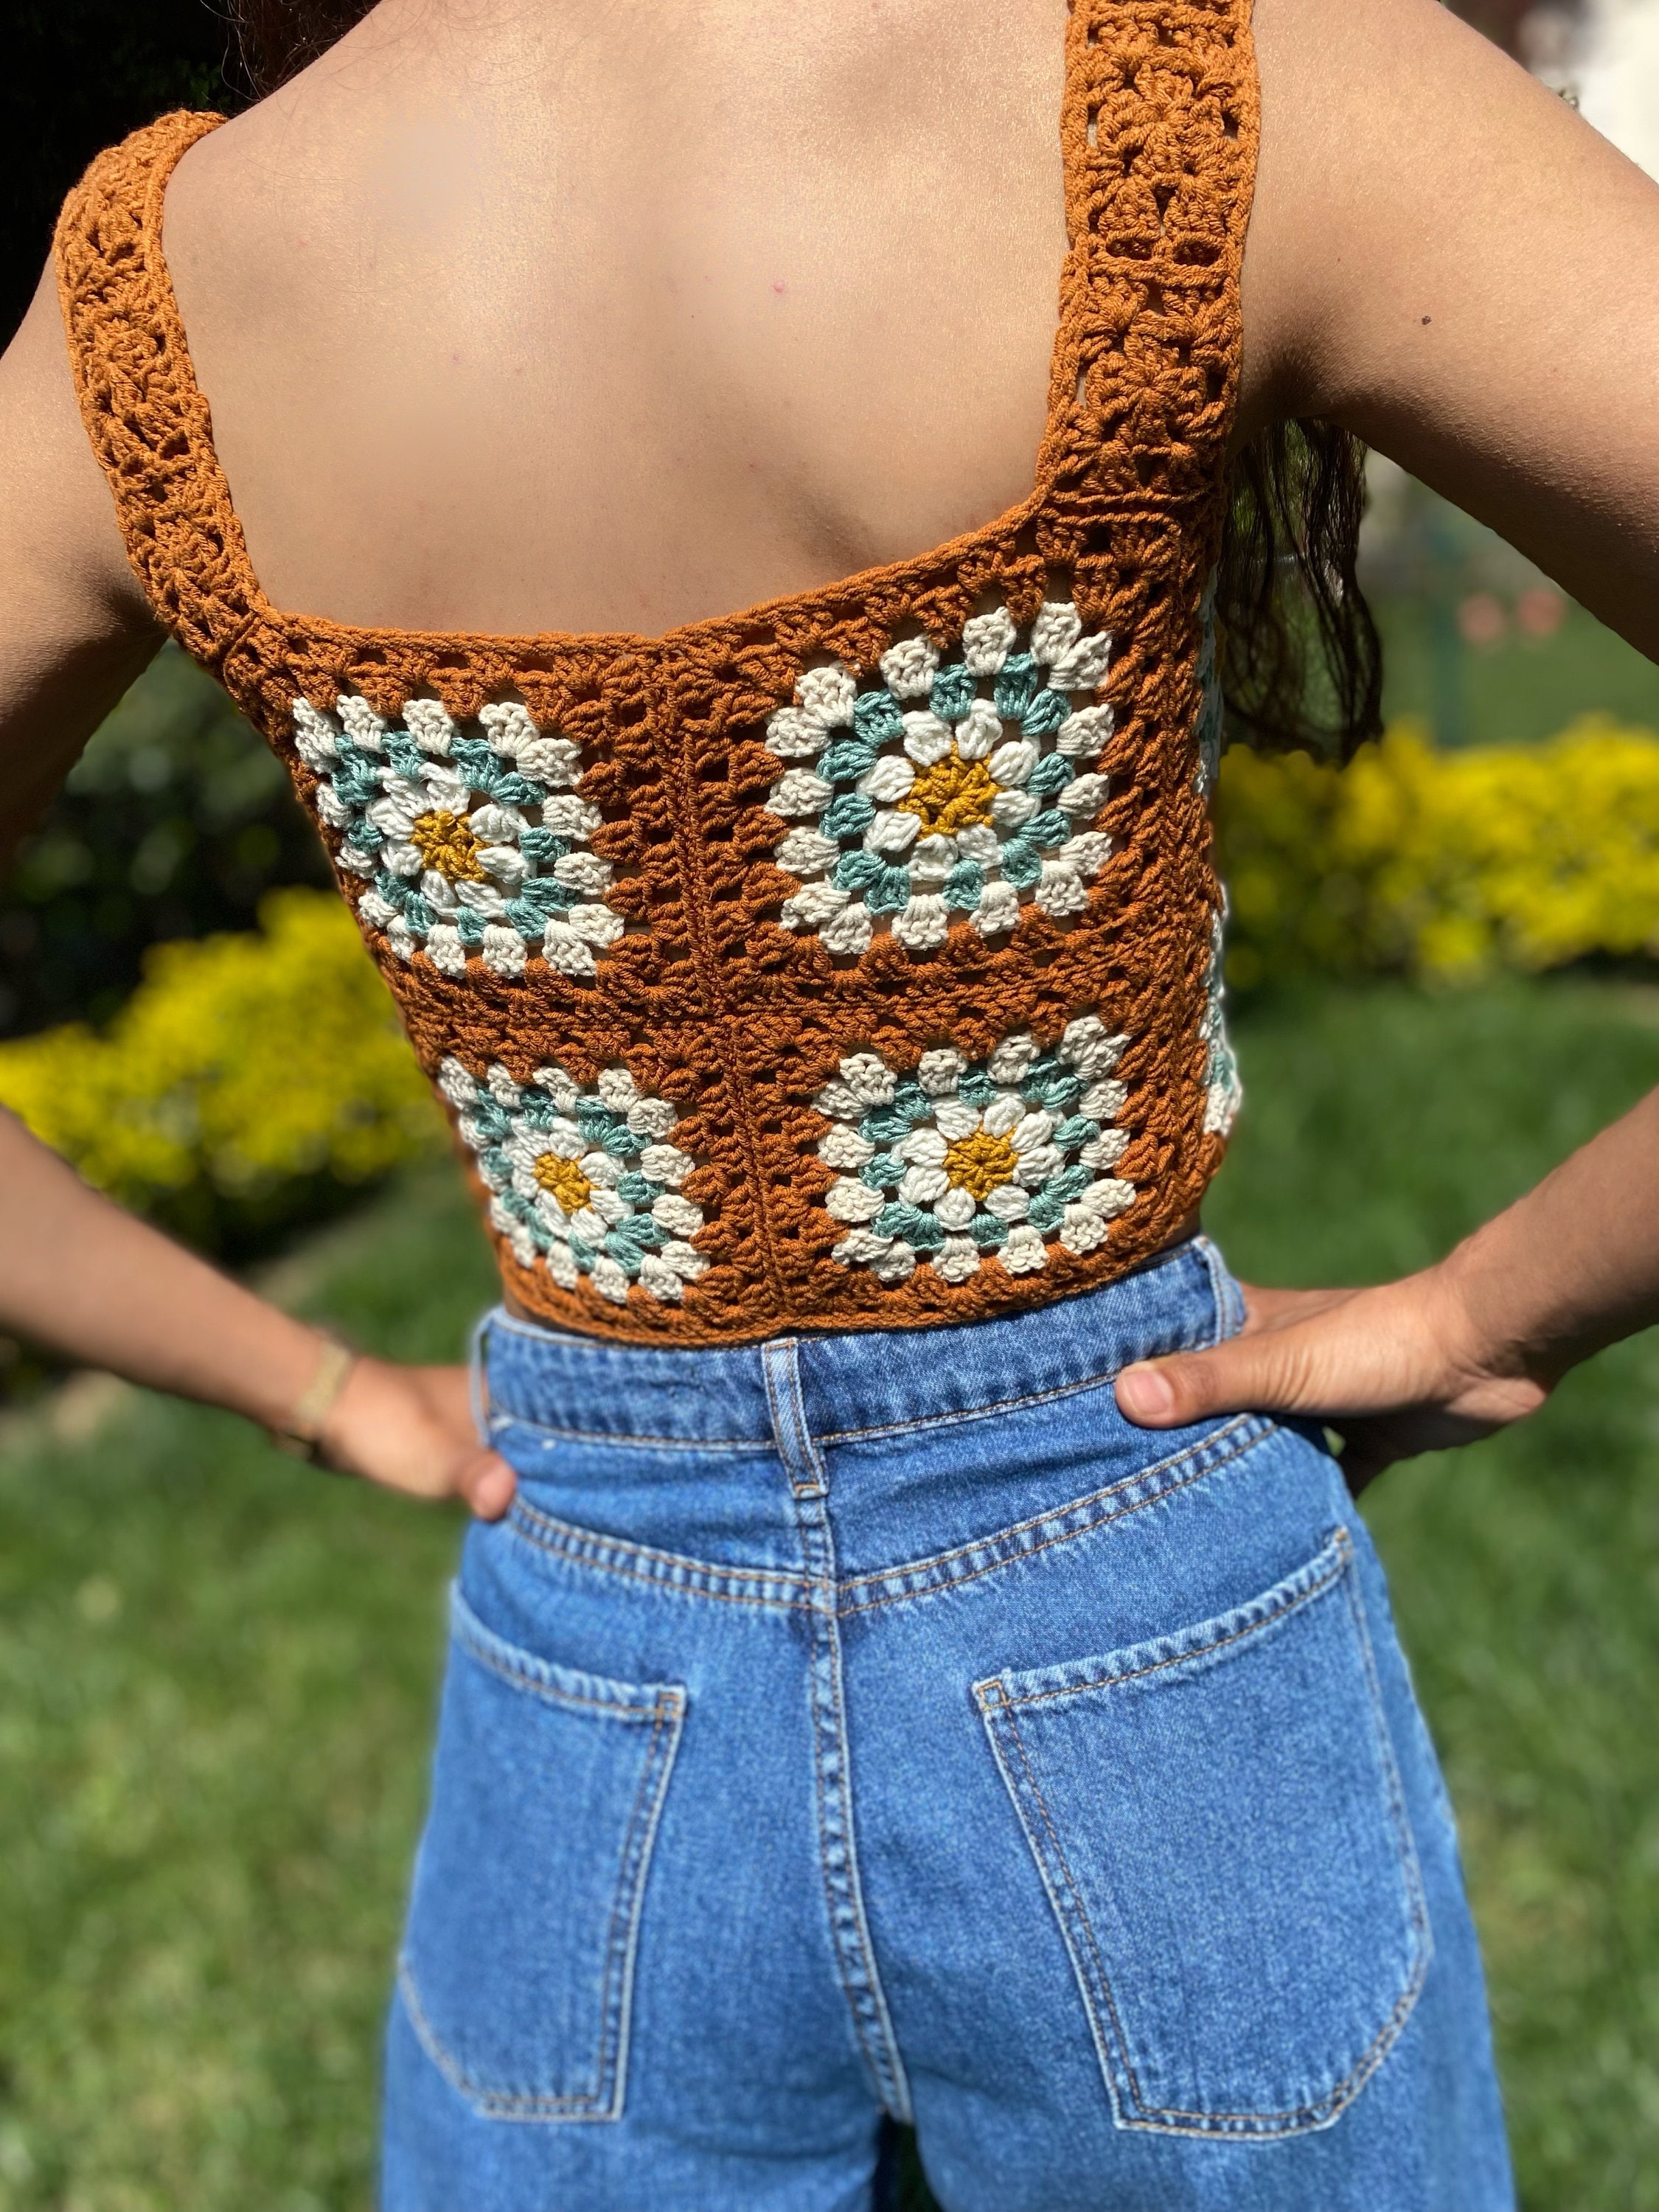 bralette finished! made from recycled jeans yarn! : r/crochet